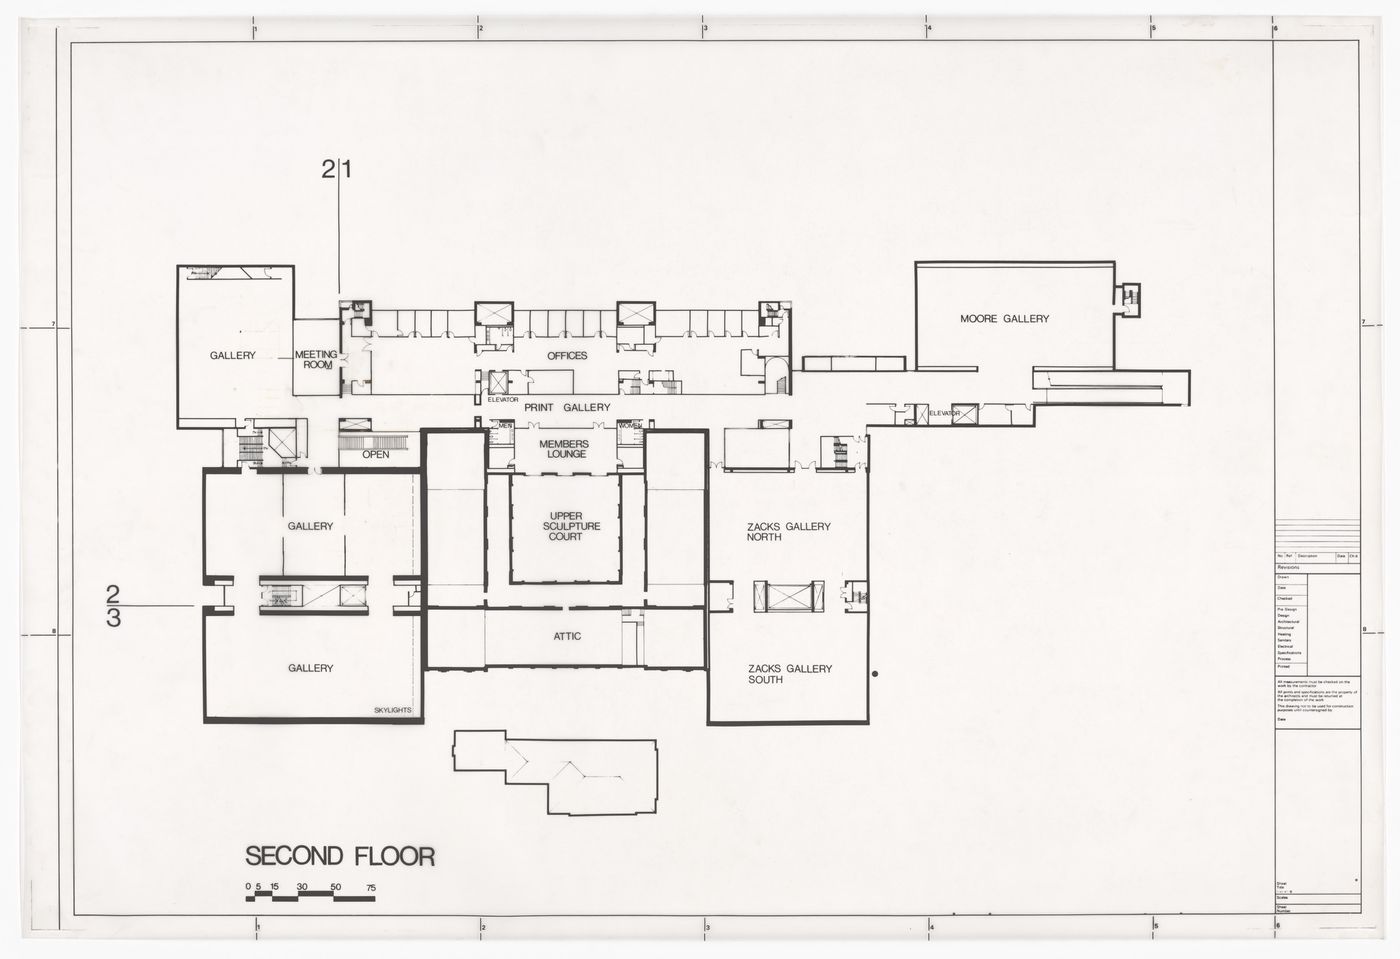 Second floor plan for Art Gallery of Ontario, Stage II Expansion, Toronto